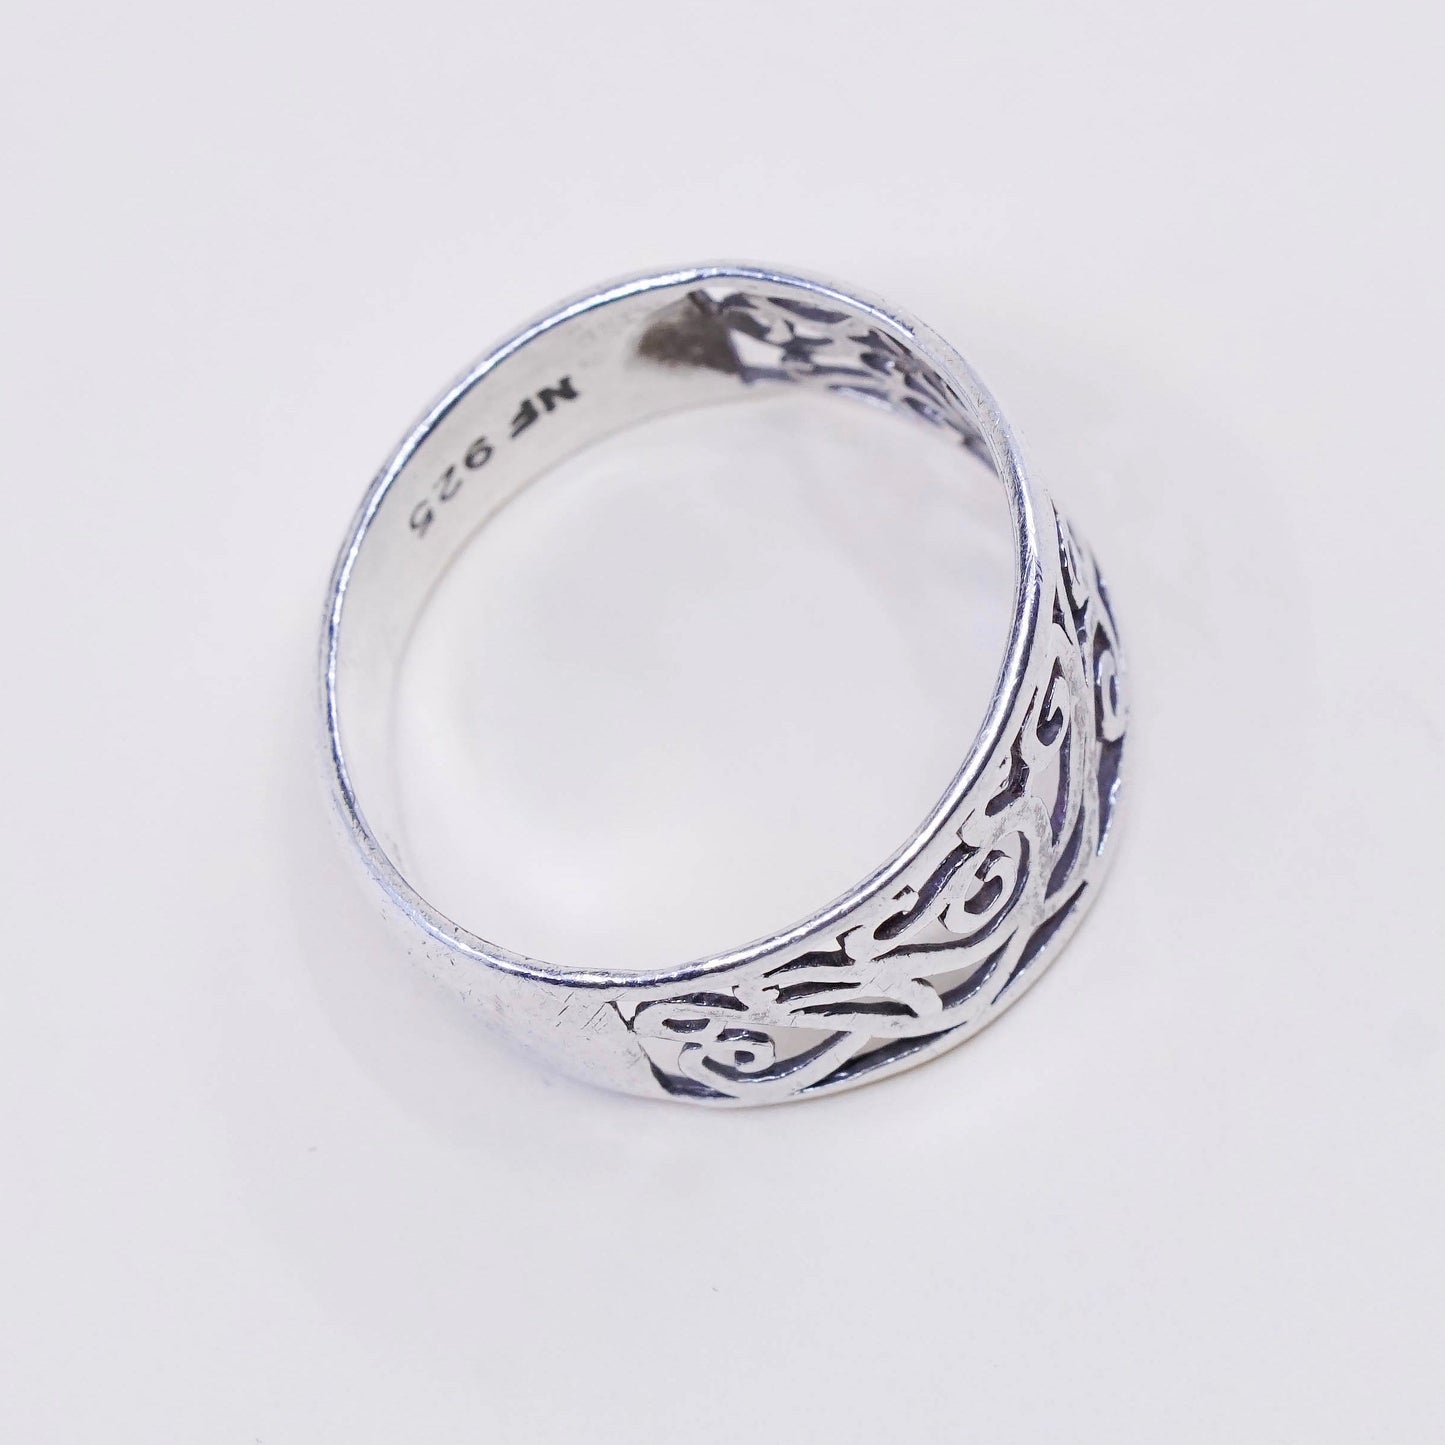 Size 7.25, vintage sterling silver handmade ring, 925 band with whirl filigree